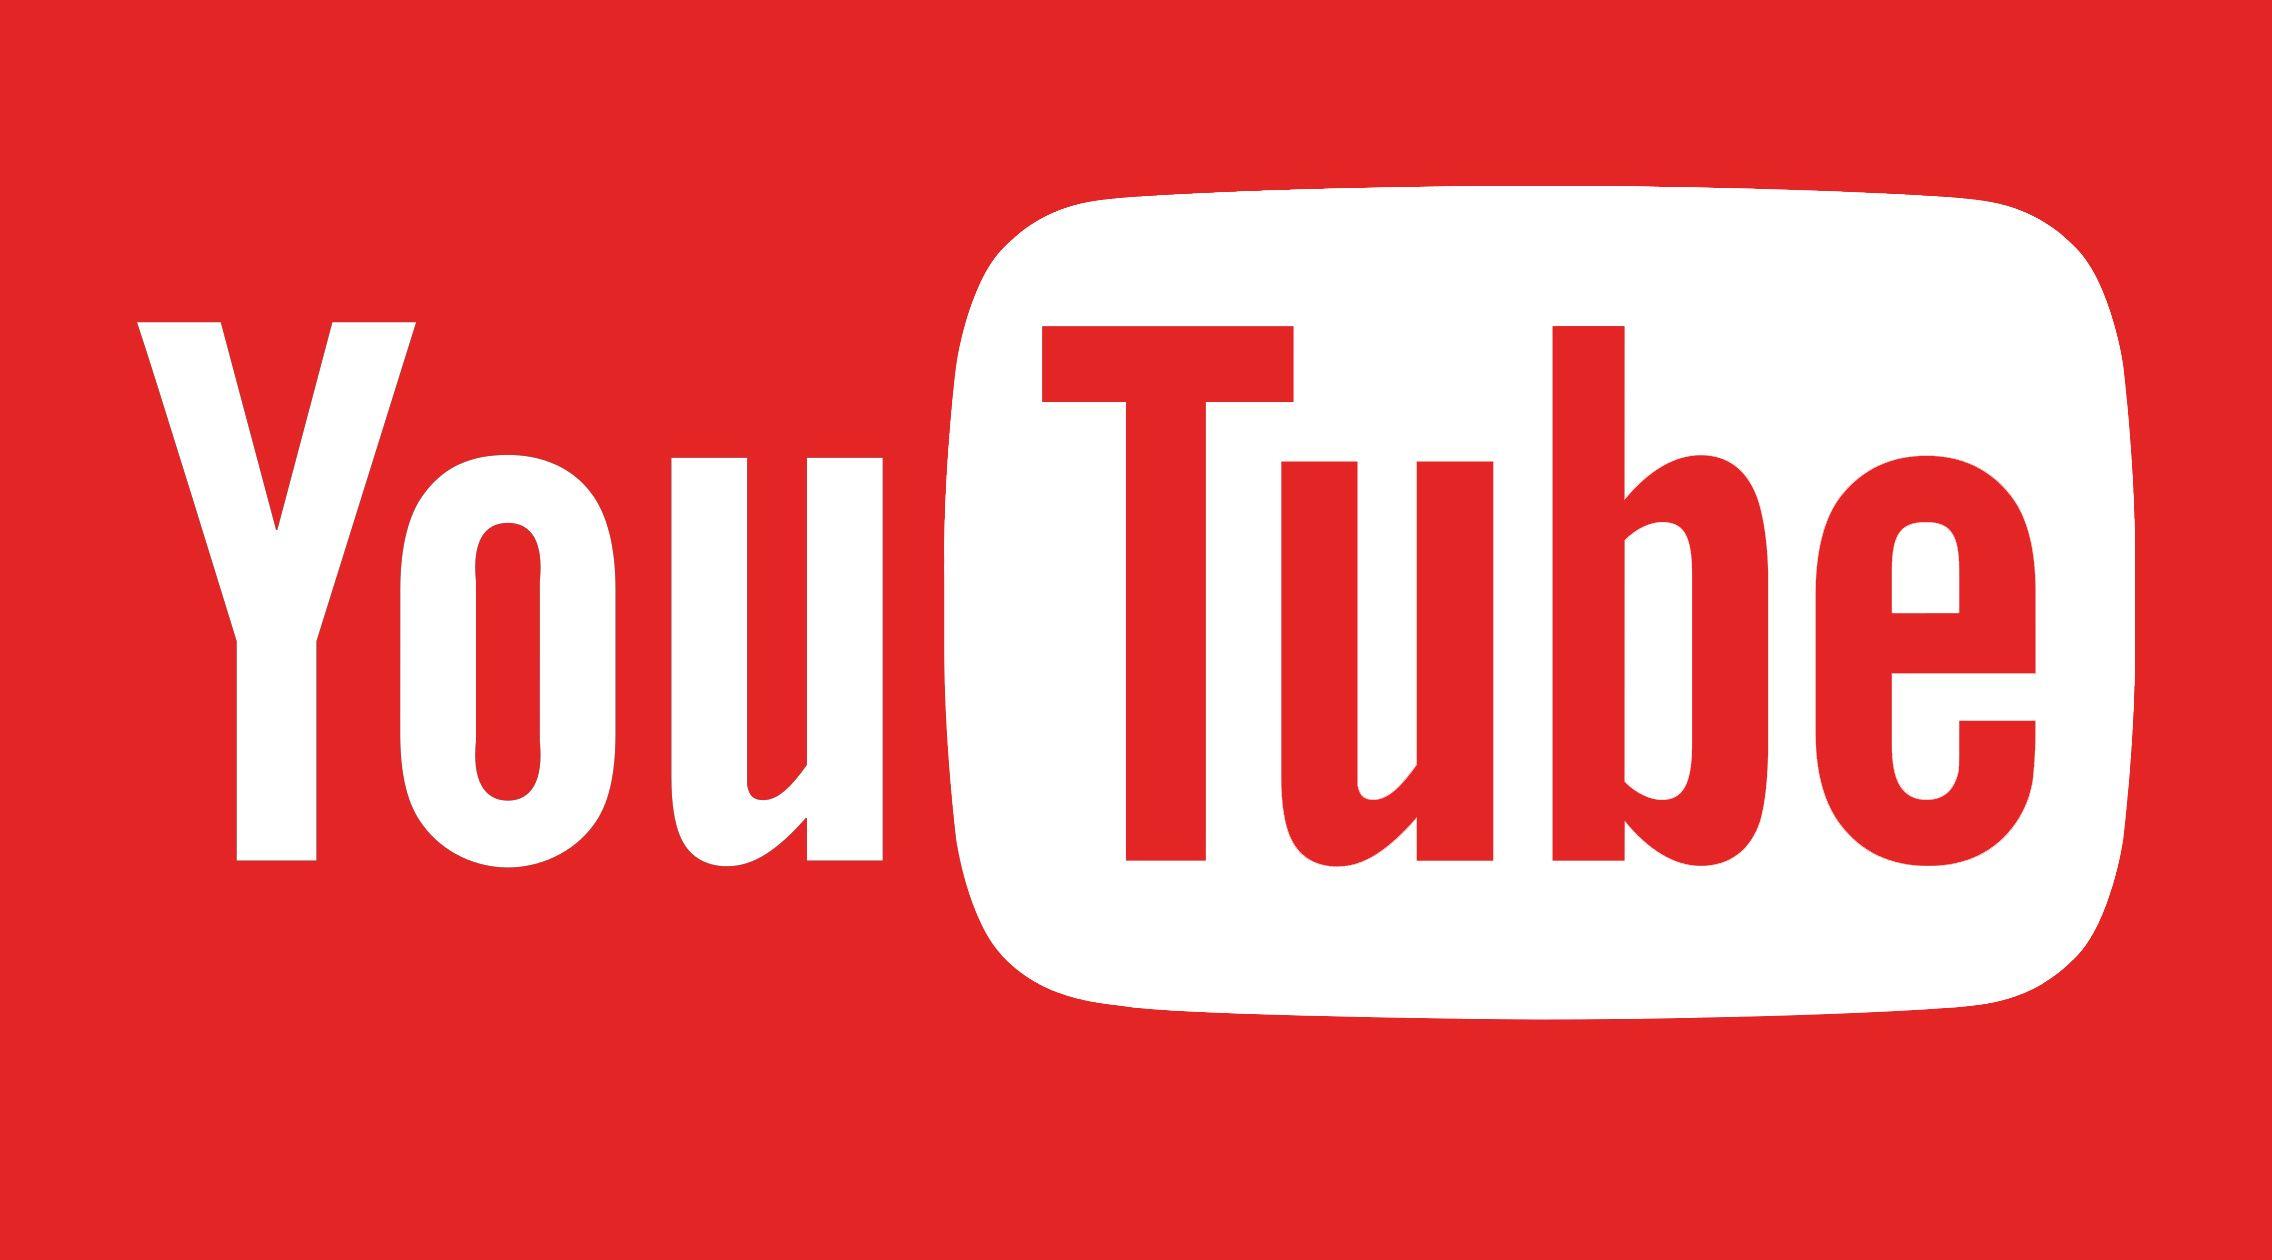 YouTube Logo - YouTube Logo, YouTube Symbol, Meaning, History and Evolution